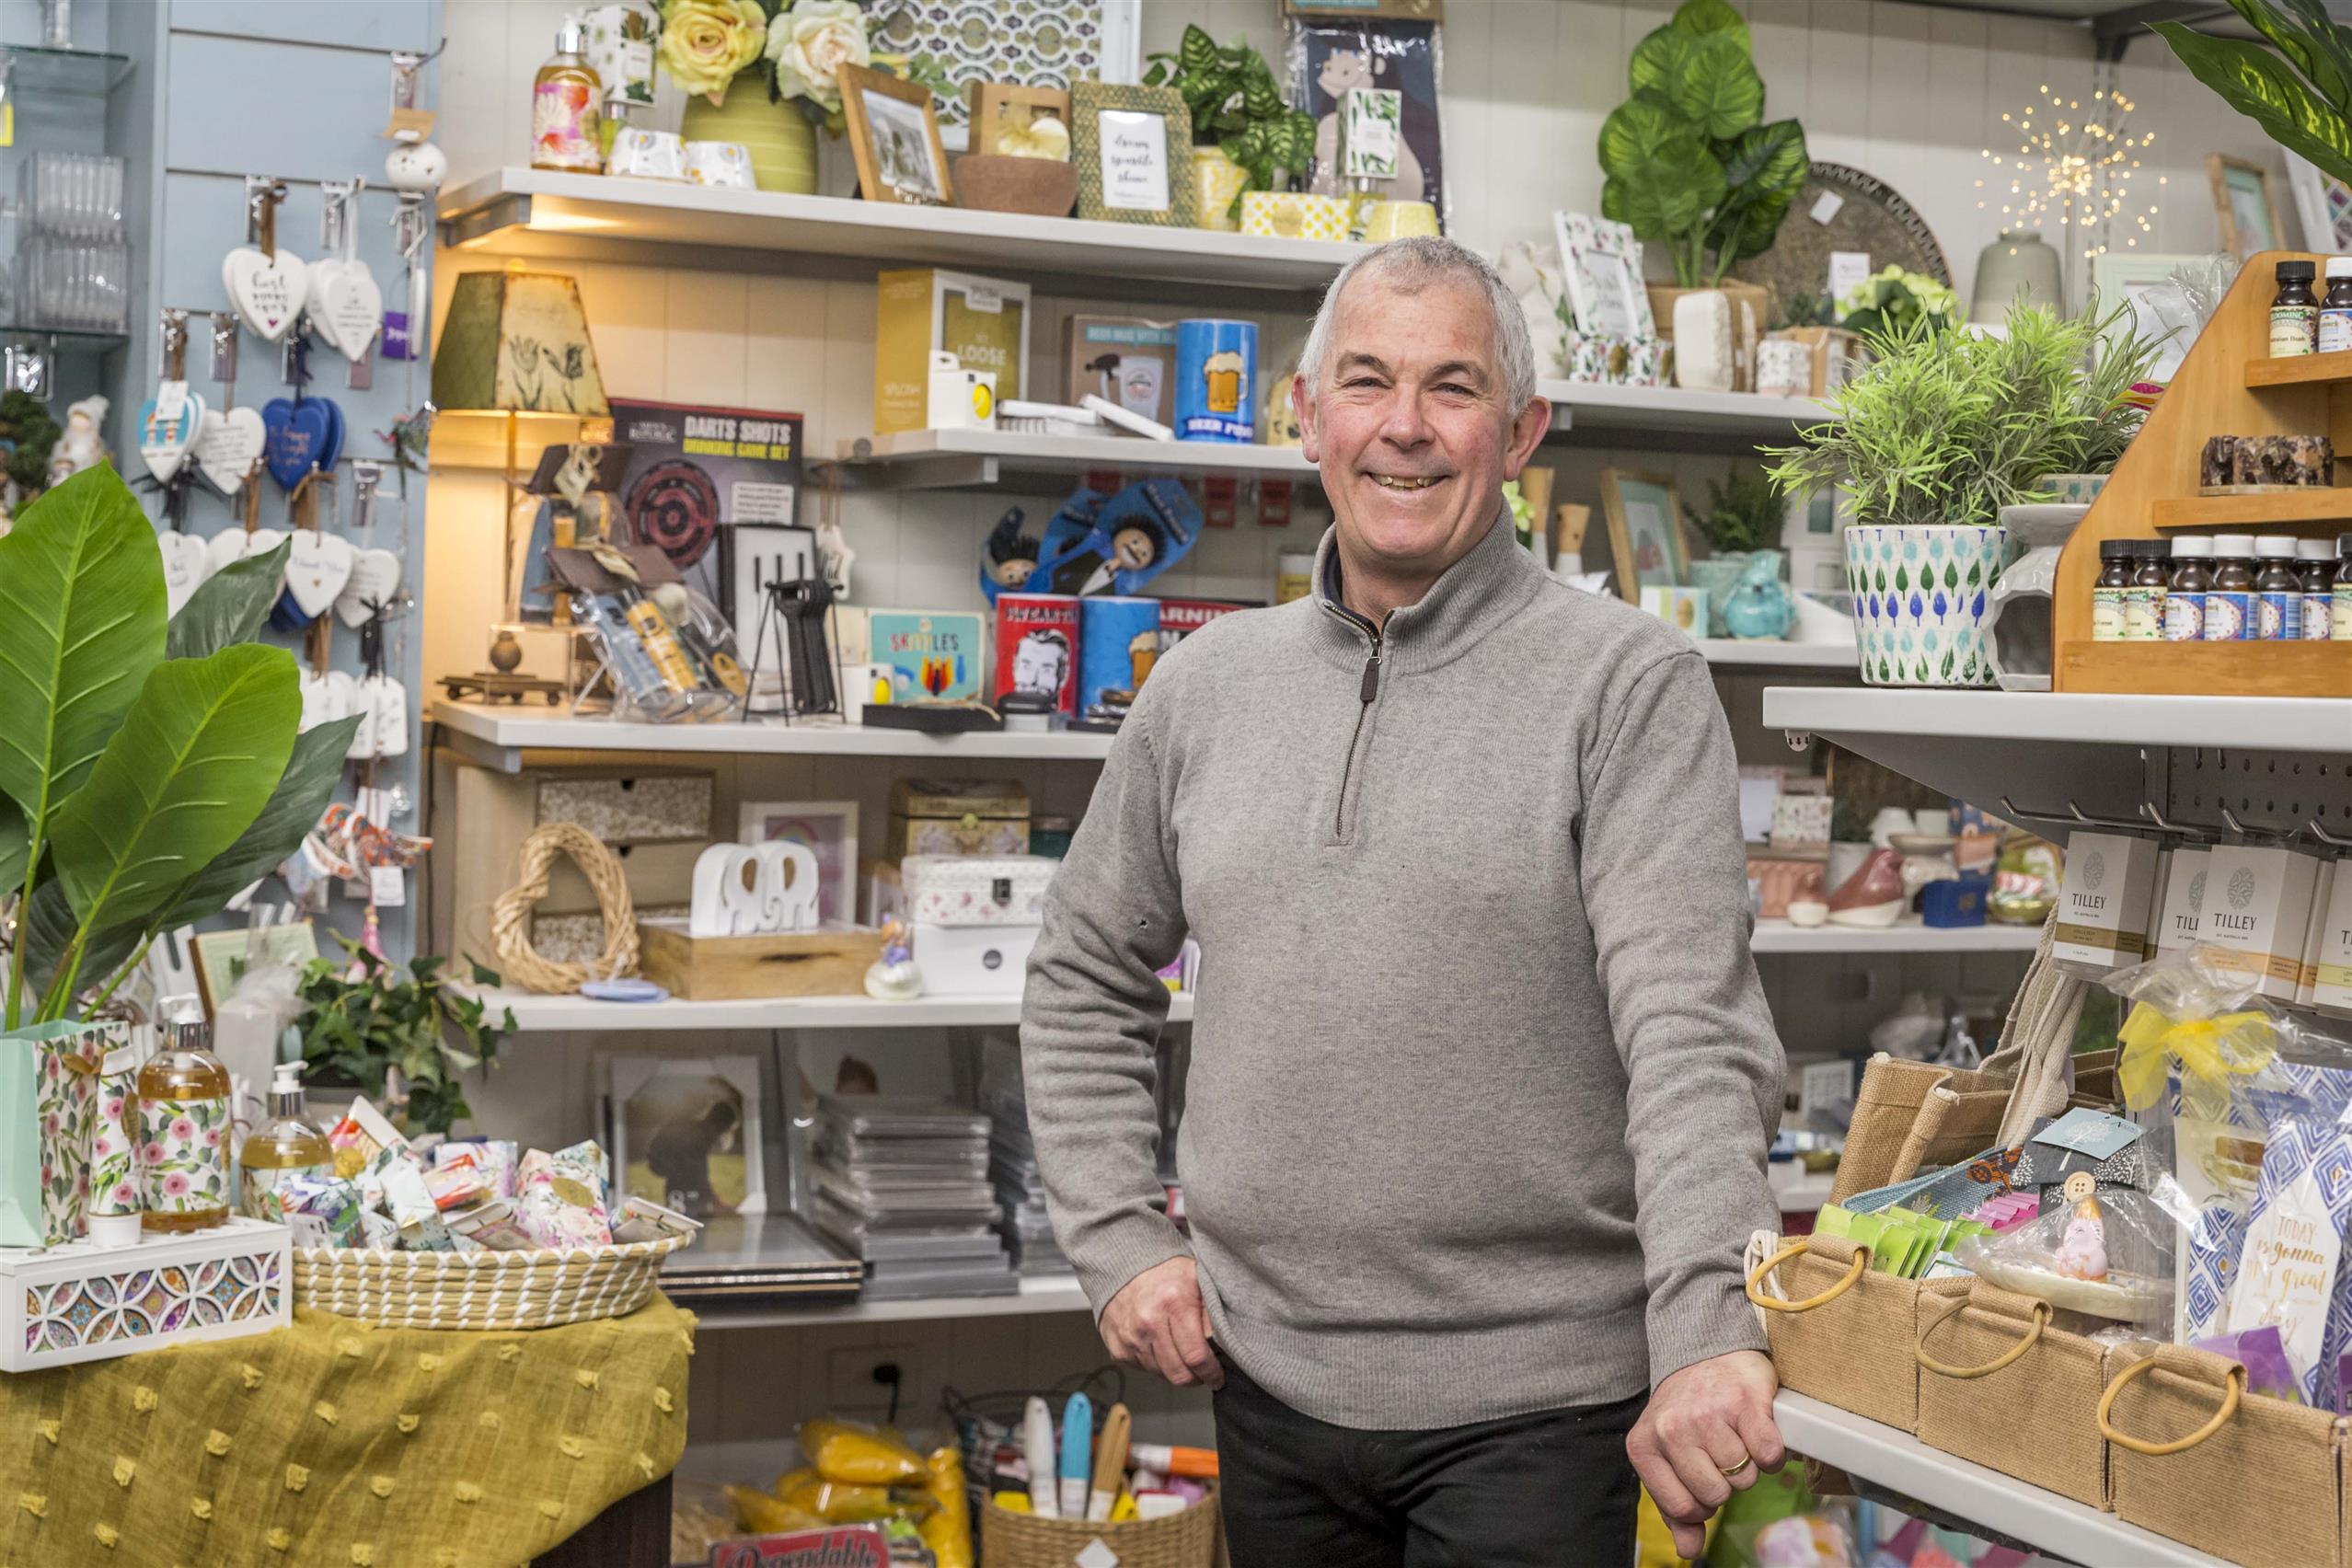 A man stands beside his shop counter smiling at the camera. Shelves full of giftware, nick nacks and decor fill the space behind him.